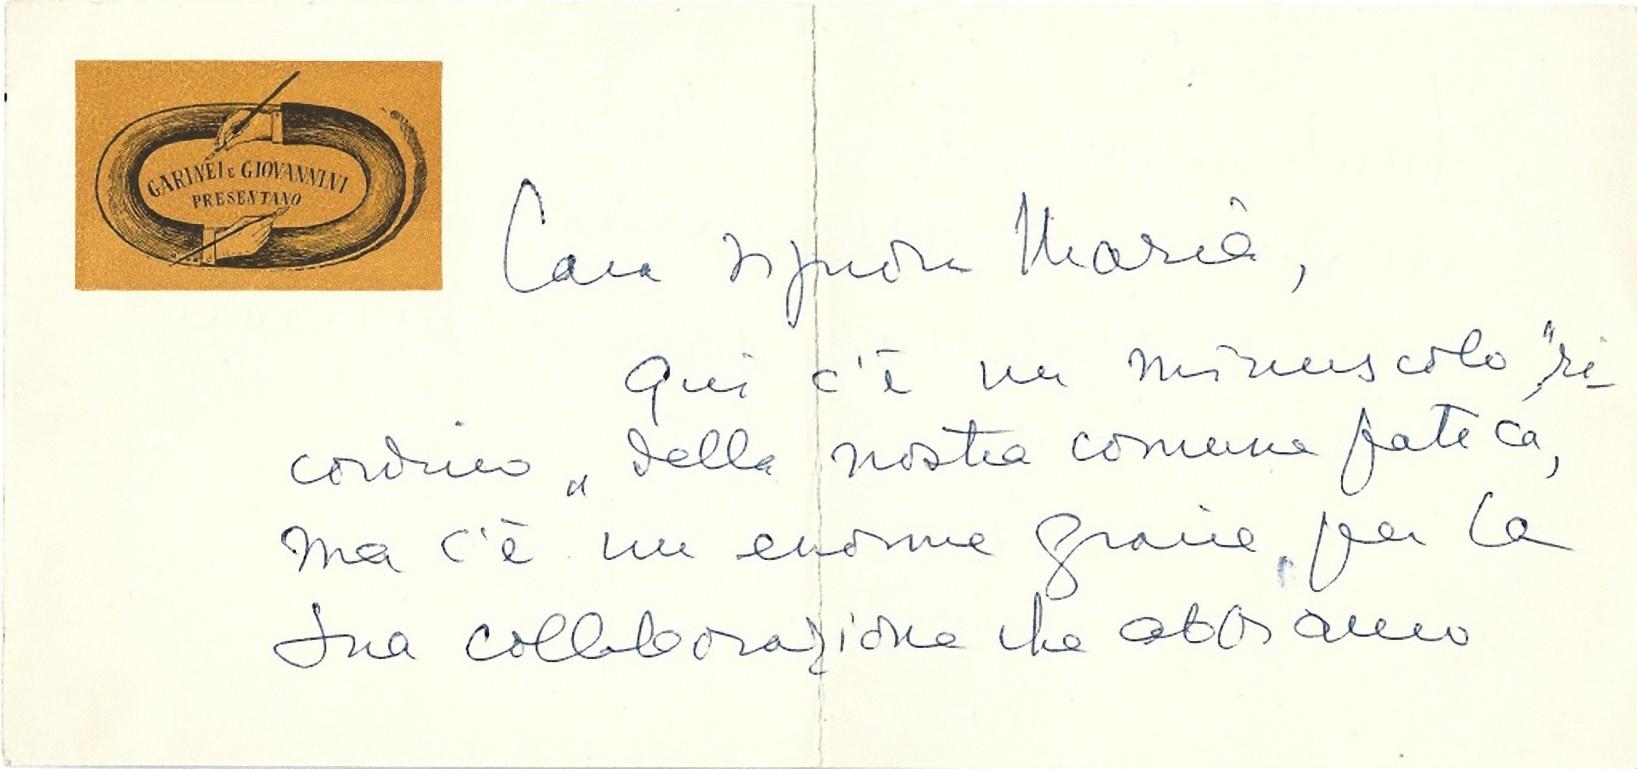 Autograph Card by Garinei and Giovannini - 1950s